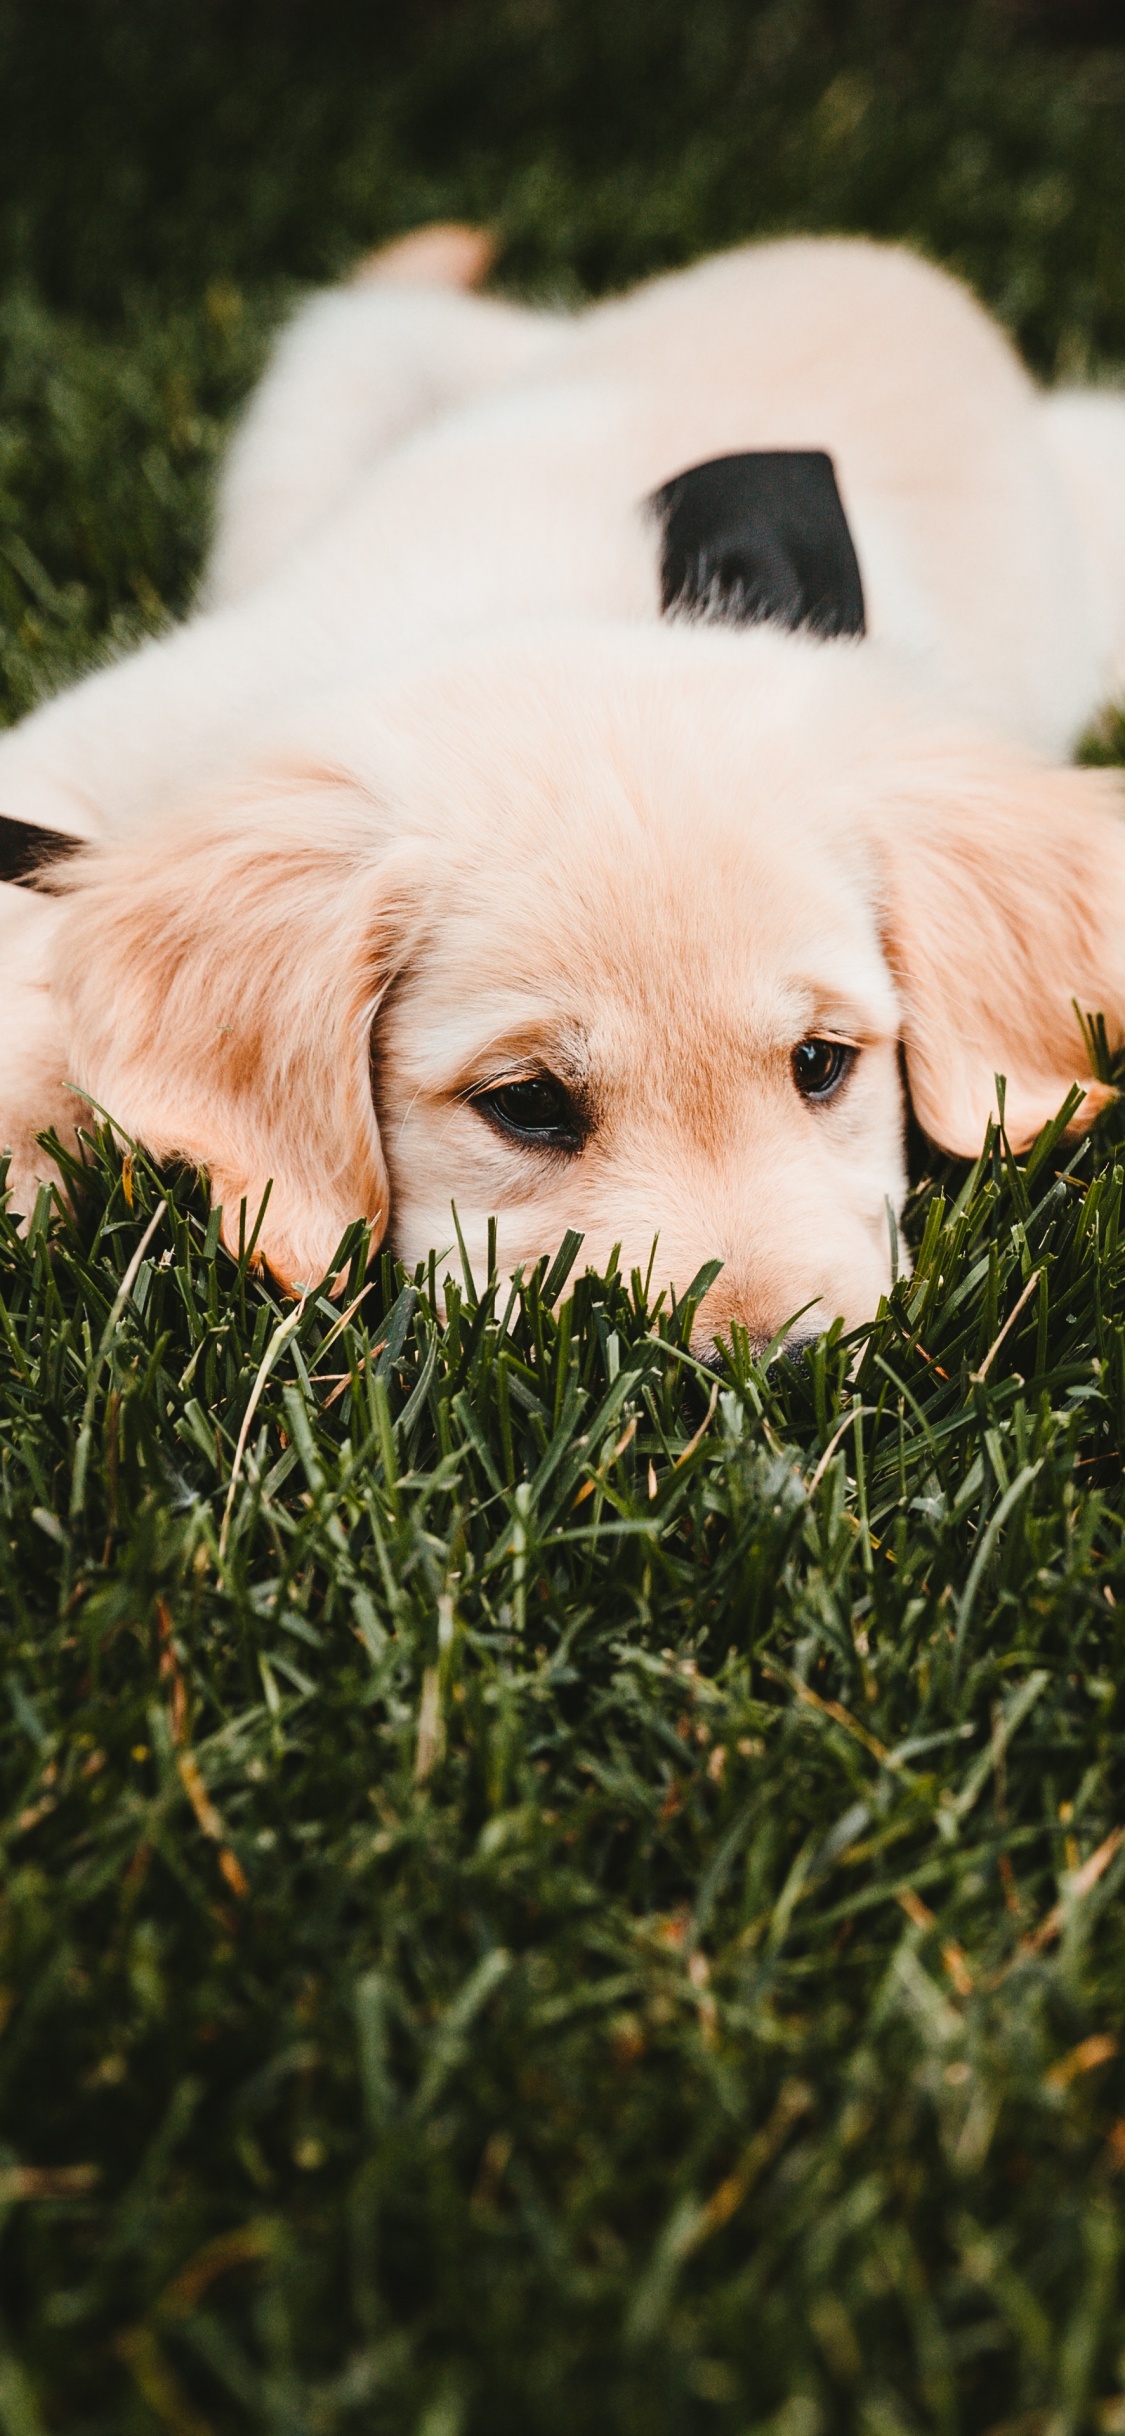 White Short Coated Dog Lying on Green Grass Field During Daytime. Wallpaper in 1125x2436 Resolution